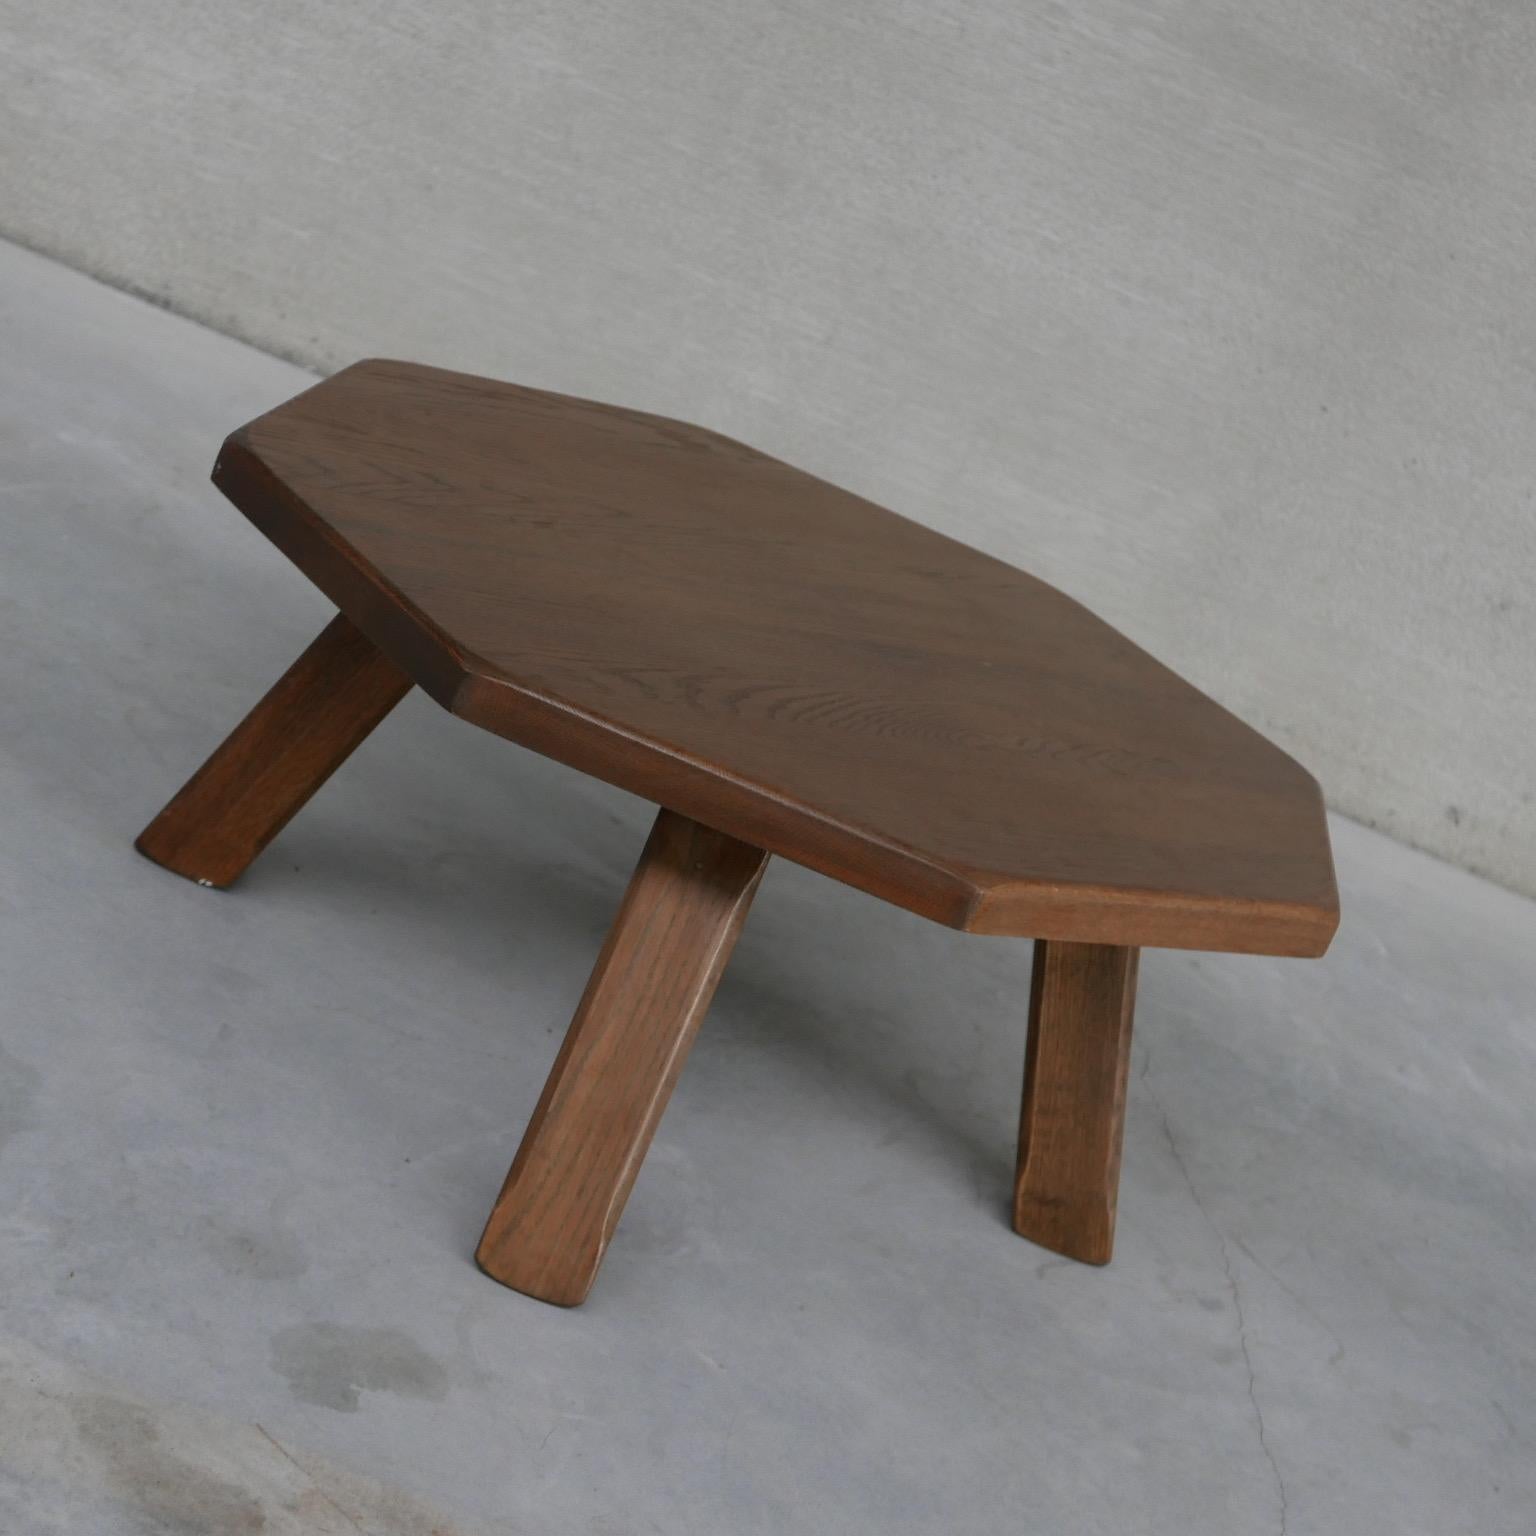 A mid-century almost brutalist style hexagonal coffee table. 

Belgium, c1960s. 

Raised over four thick legs. 

Good condition, the top can be lightly refinished upon request before delivery. 

Location: Belgium Location

Dimensions: 98 W